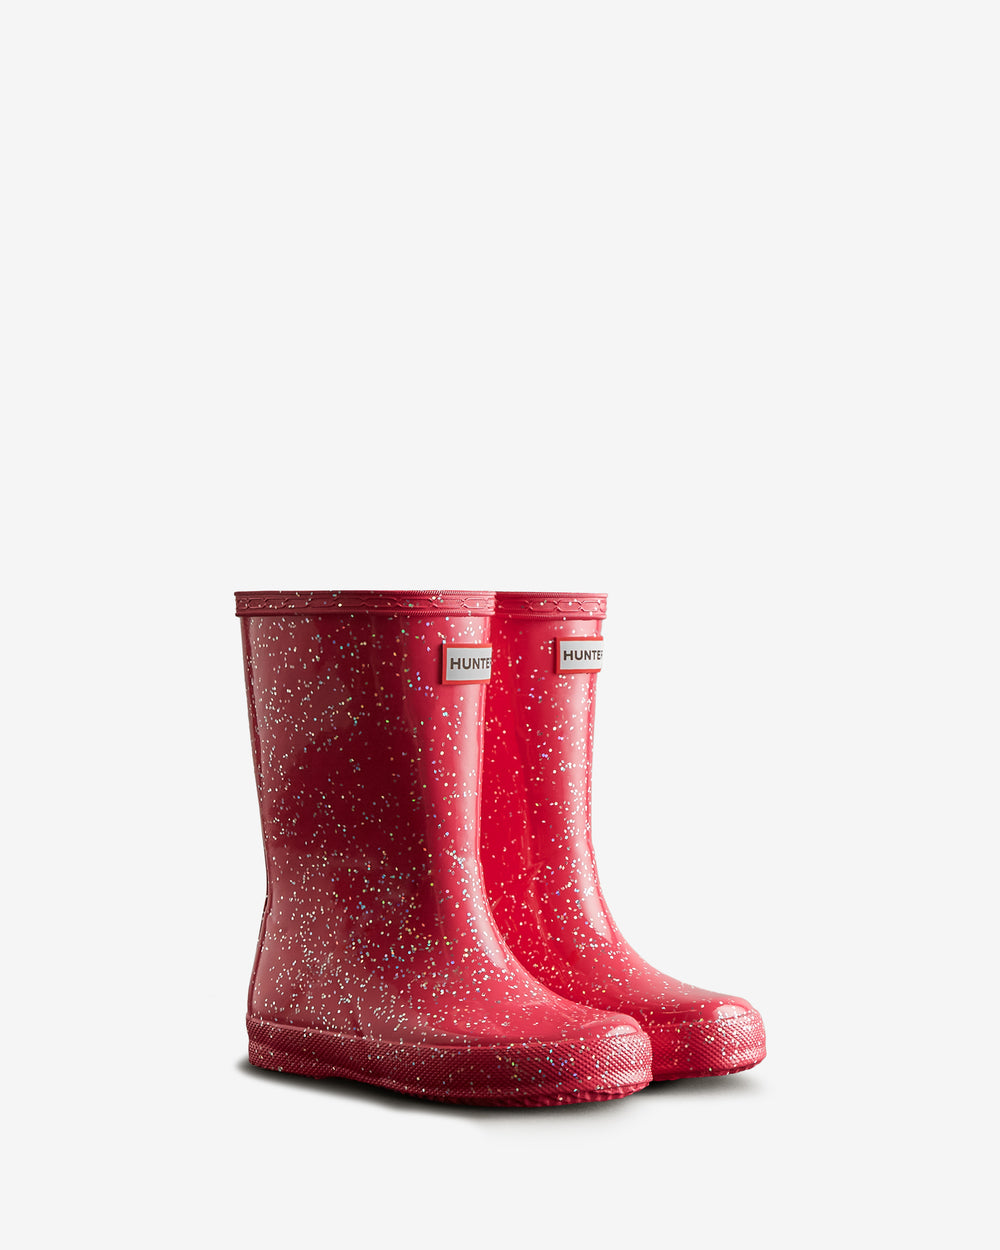 Kids First (18 Months-8 Years) Giant Glitter Wellington Boots